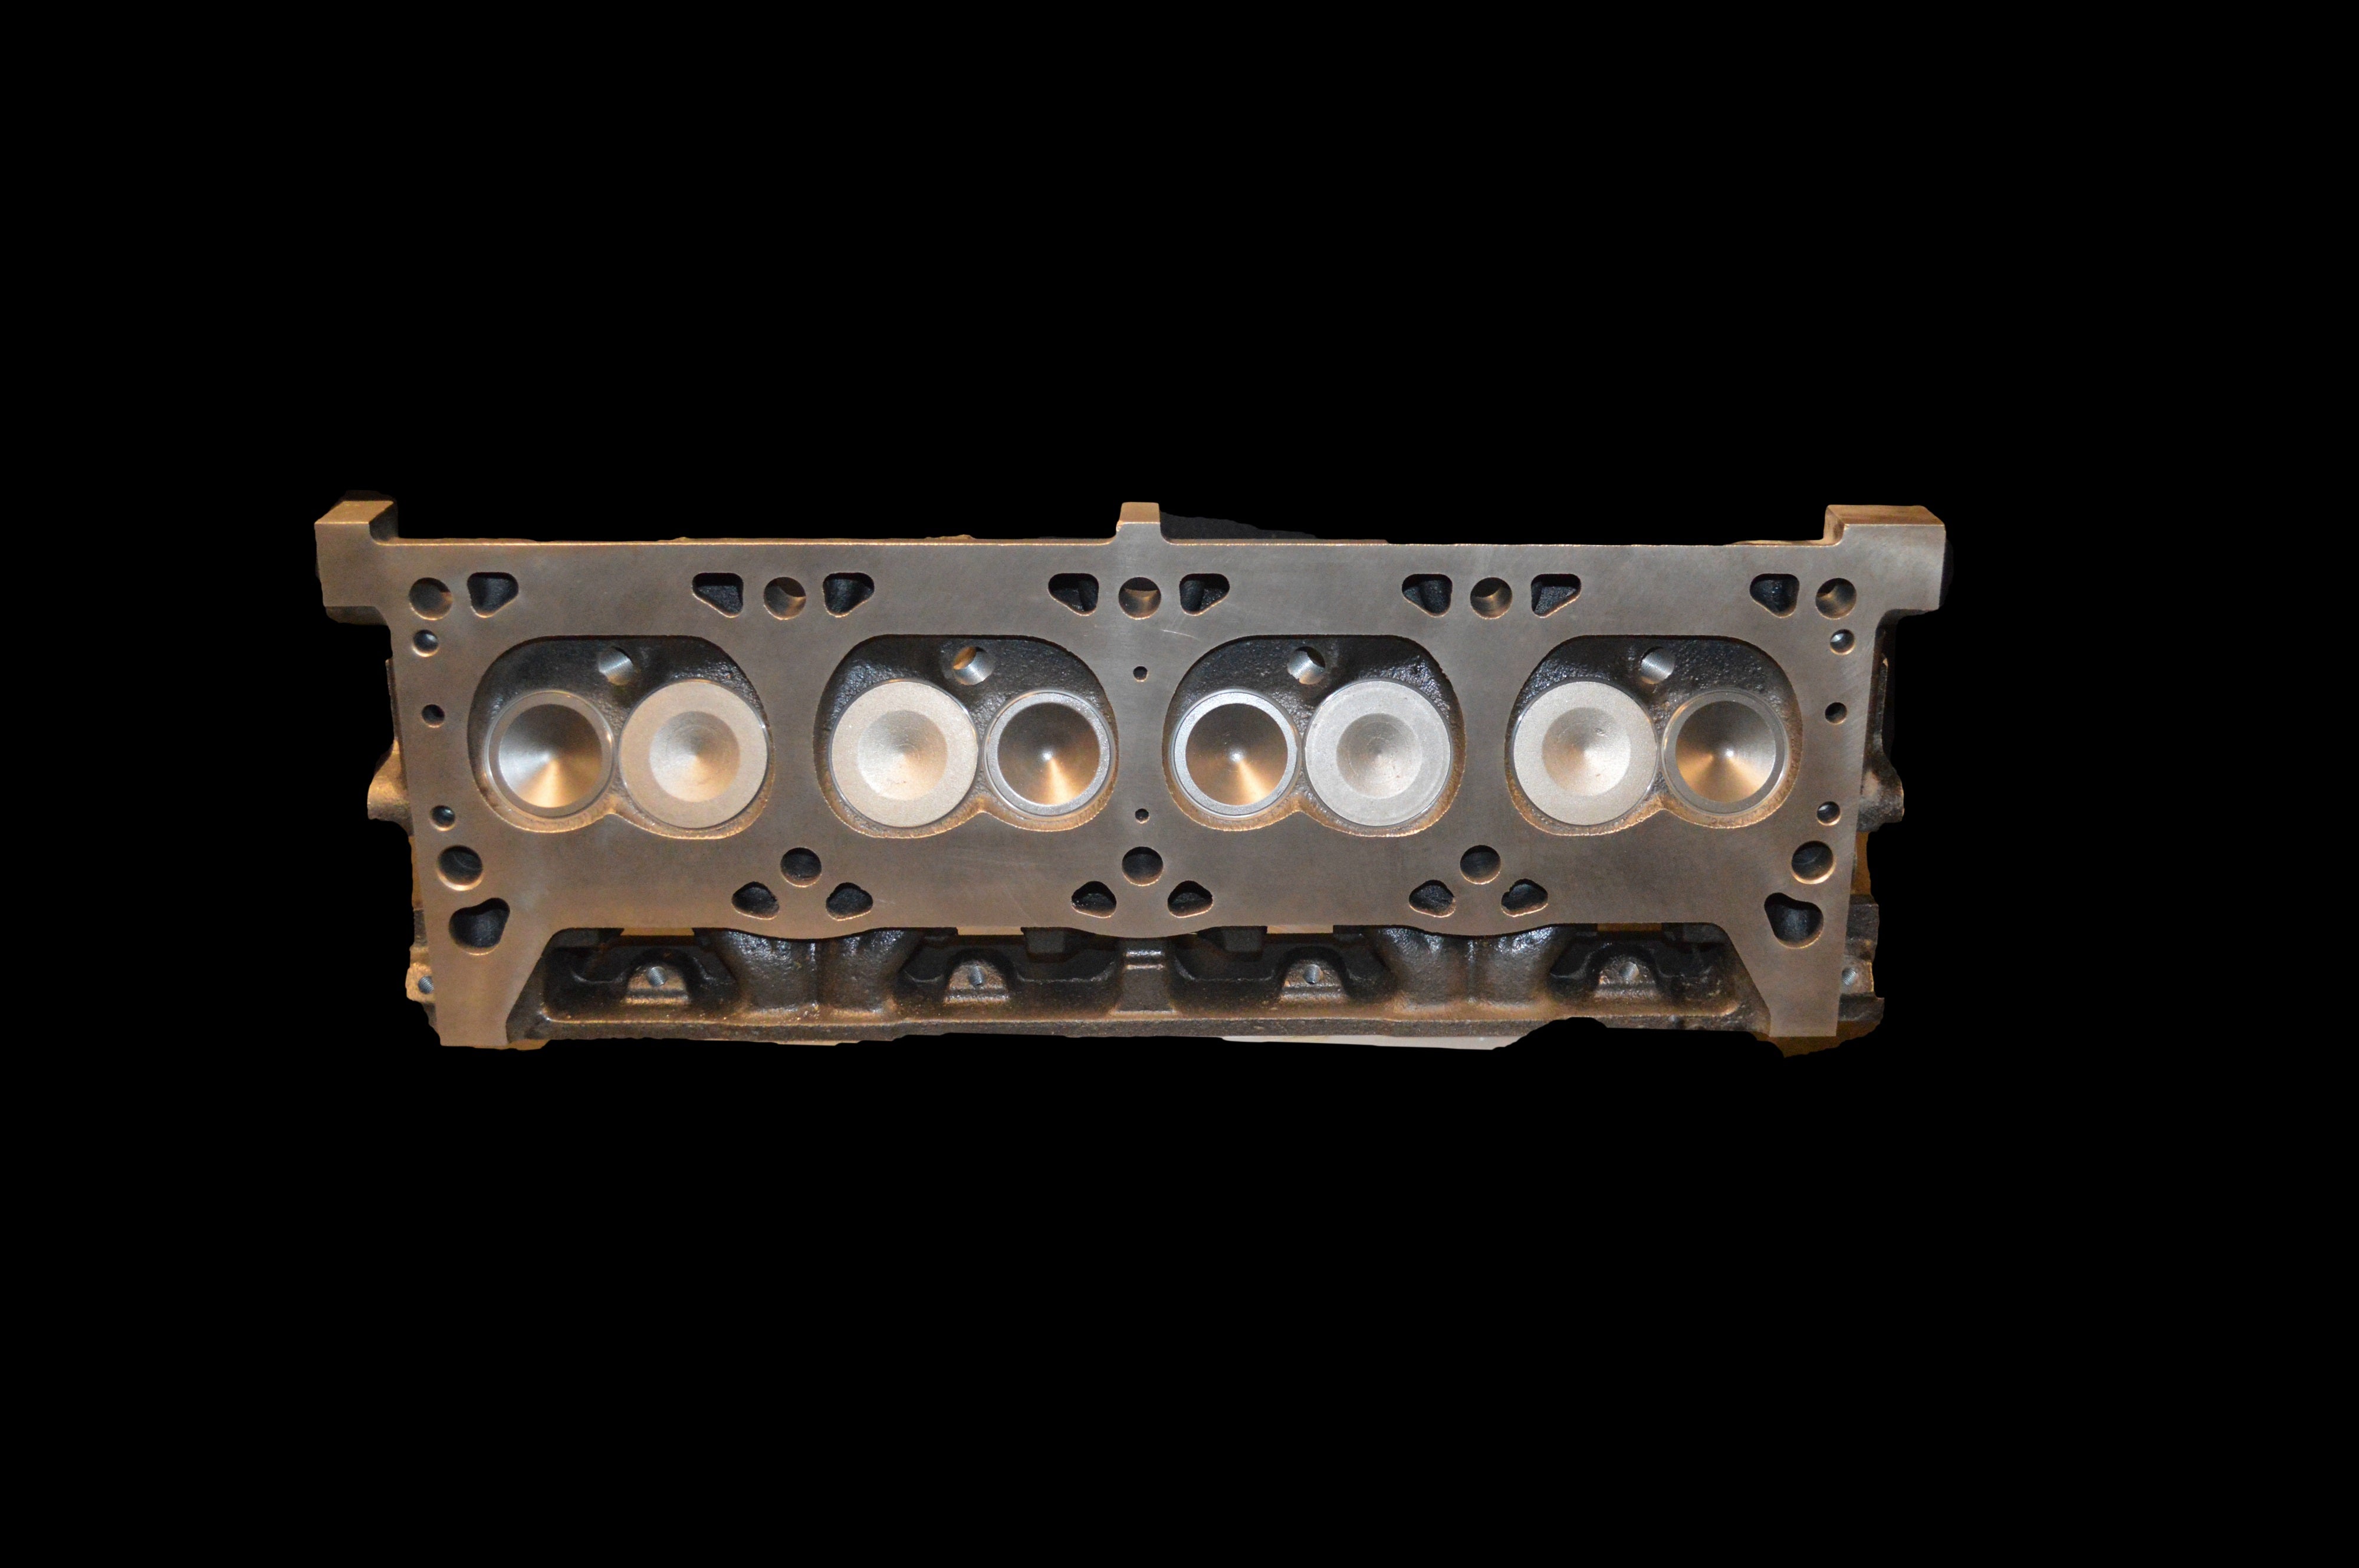 Chrysler Dodge Magnum 318 / 360 1992 - 2004 Cylinder Heads, Assembled  (Pair) - EQ Cores & Recycling